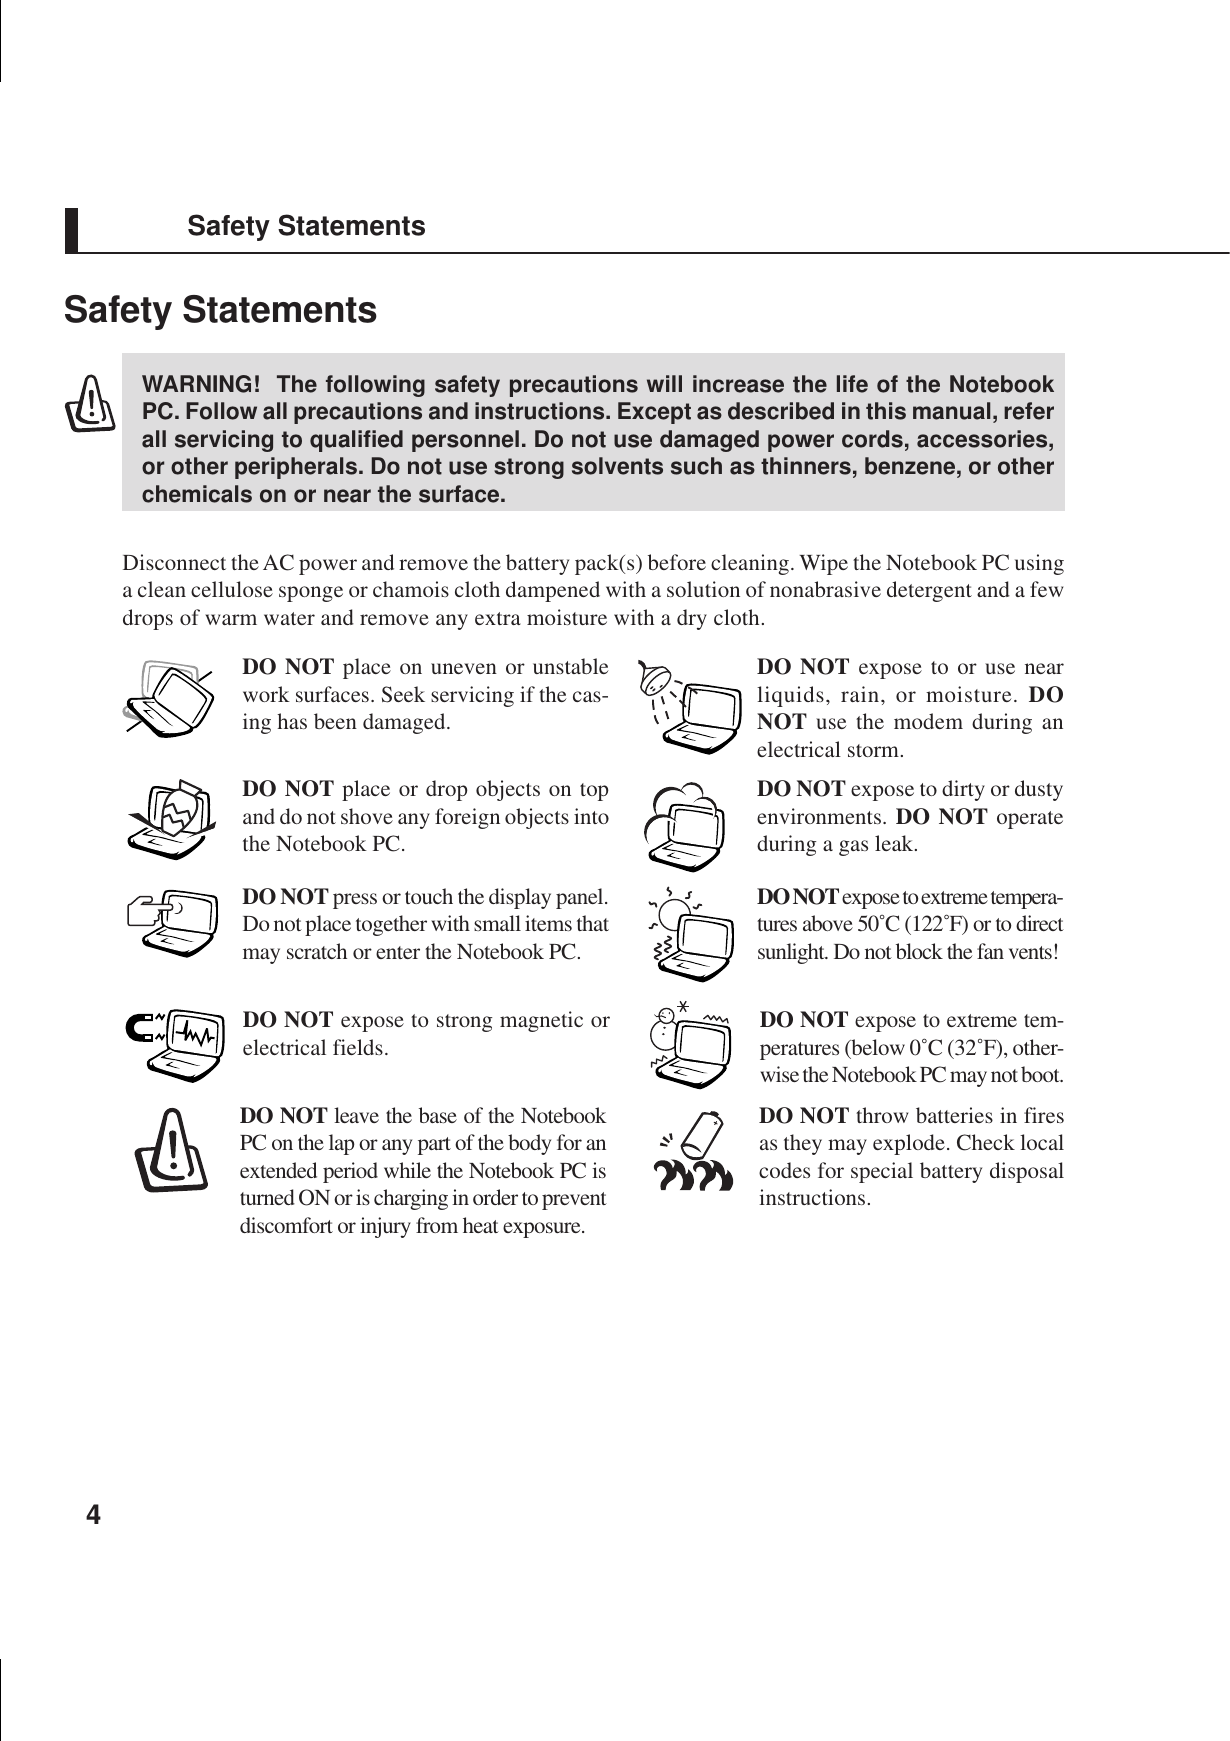 4Safety StatementsWARNING!  The following safety precautions will increase the life of the NotebookPC. Follow all precautions and instructions. Except as described in this manual, referall servicing to qualified personnel. Do not use damaged power cords, accessories,or other peripherals. Do not use strong solvents such as thinners, benzene, or otherchemicals on or near the surface.Disconnect the AC power and remove the battery pack(s) before cleaning. Wipe the Notebook PC usinga clean cellulose sponge or chamois cloth dampened with a solution of nonabrasive detergent and a fewdrops of warm water and remove any extra moisture with a dry cloth.DO NOT expose to or use nearliquids, rain, or moisture. DONOT use the modem during anelectrical storm.DO NOT expose to dirty or dustyenvironments. DO NOT operateduring a gas leak.DO NOT expose to strong magnetic orelectrical fields.DO NOT expose to extreme tempera-tures above 50˚C (122˚F) or to directsunlight. Do not block the fan vents!DO NOT place on uneven or unstablework surfaces. Seek servicing if the cas-ing has been damaged.DO NOT place or drop objects on topand do not shove any foreign objects intothe Notebook PC.DO NOT press or touch the display panel.Do not place together with small items thatmay scratch or enter the Notebook PC.DO NOT leave the base of the NotebookPC on the lap or any part of the body for anextended period while the Notebook PC isturned ON or is charging in order to preventdiscomfort or injury from heat exposure.DO NOT throw batteries in firesas they may explode. Check localcodes for special battery disposalinstructions.DO NOT expose to extreme tem-peratures (below 0˚C (32˚F), other-wise the Notebook PC may not boot.Safety Statements